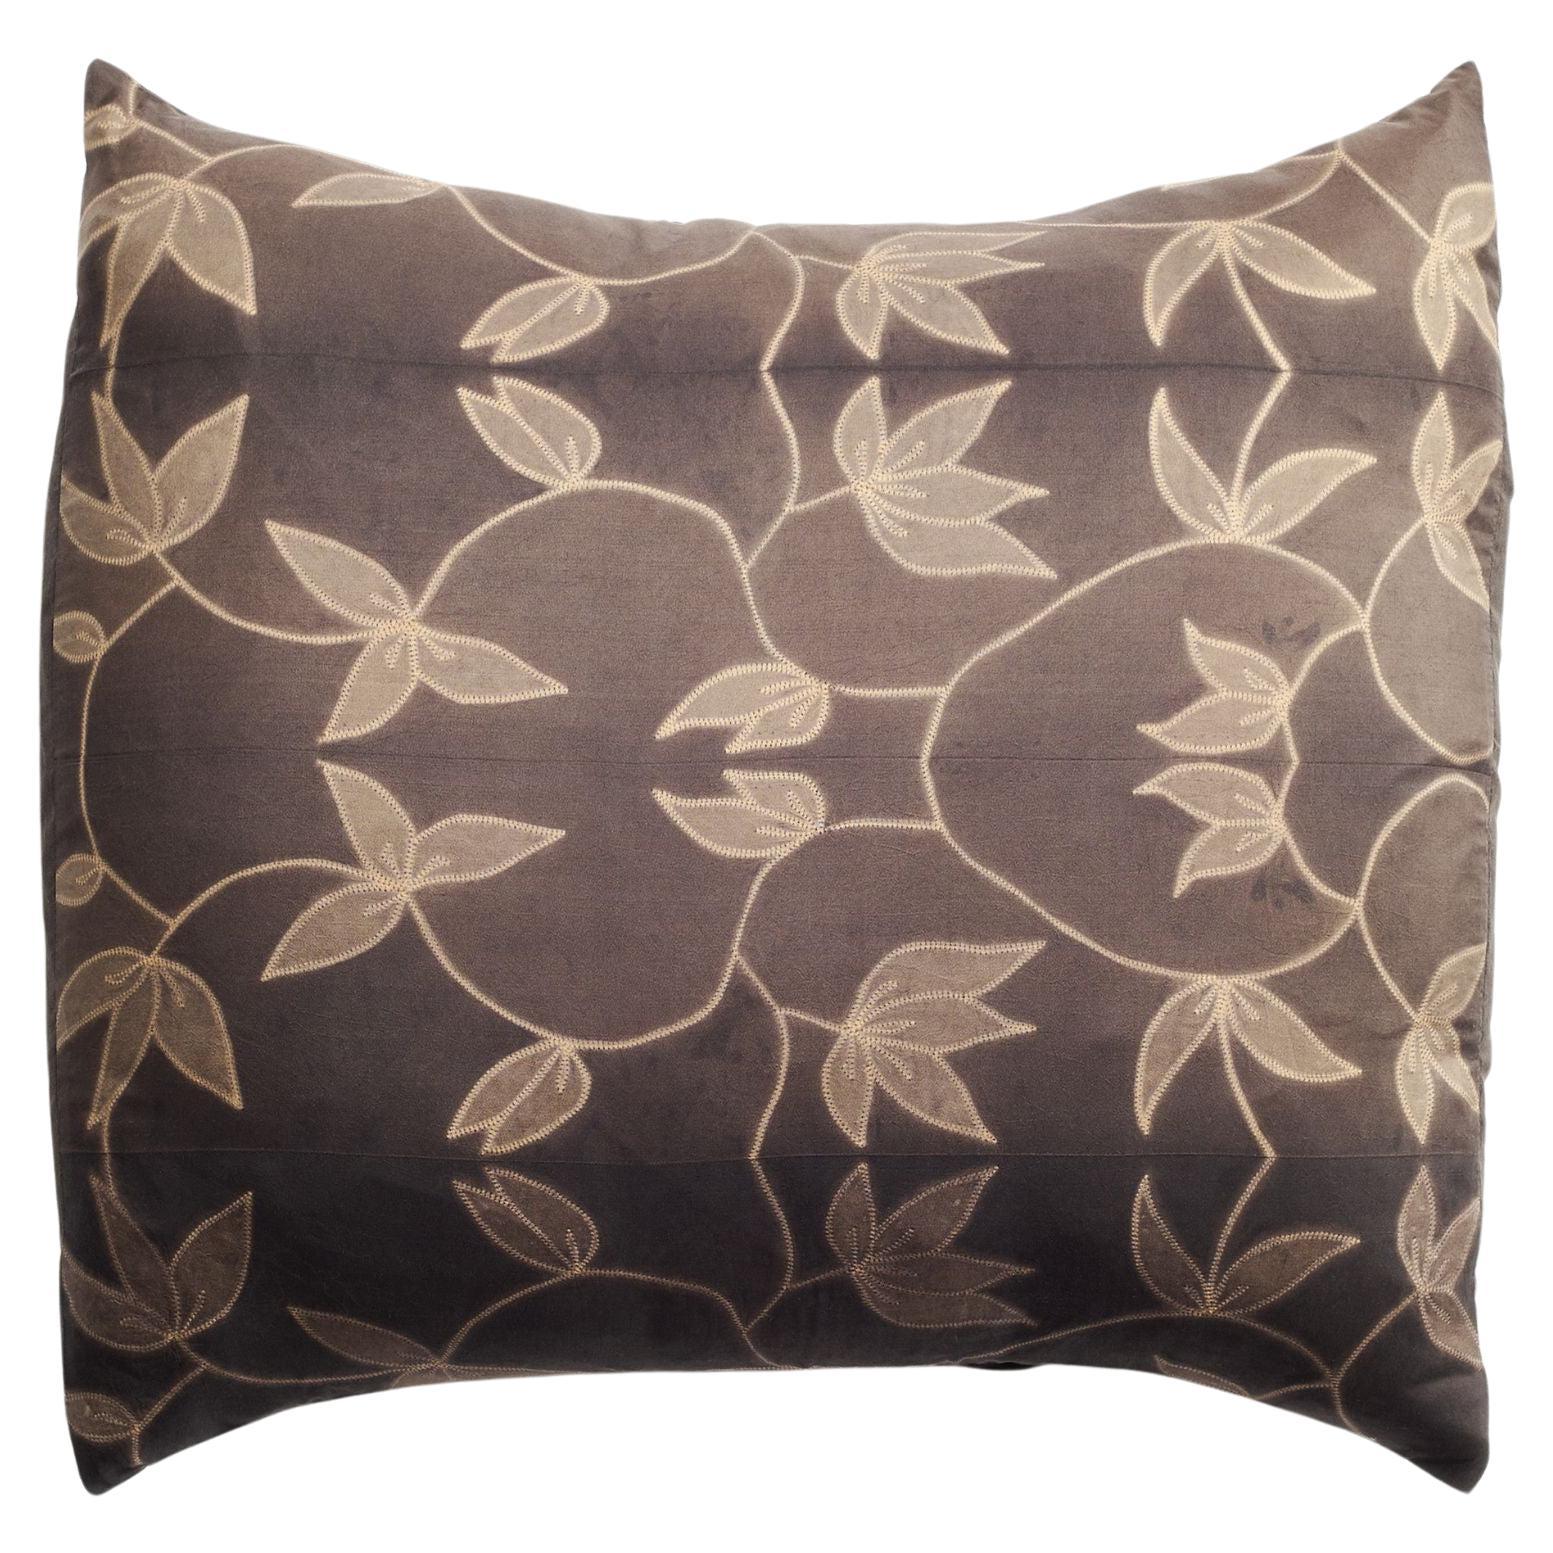 Folio Black Silk Pillow In Floral Motifs Handcrafted By Artisans  For Sale